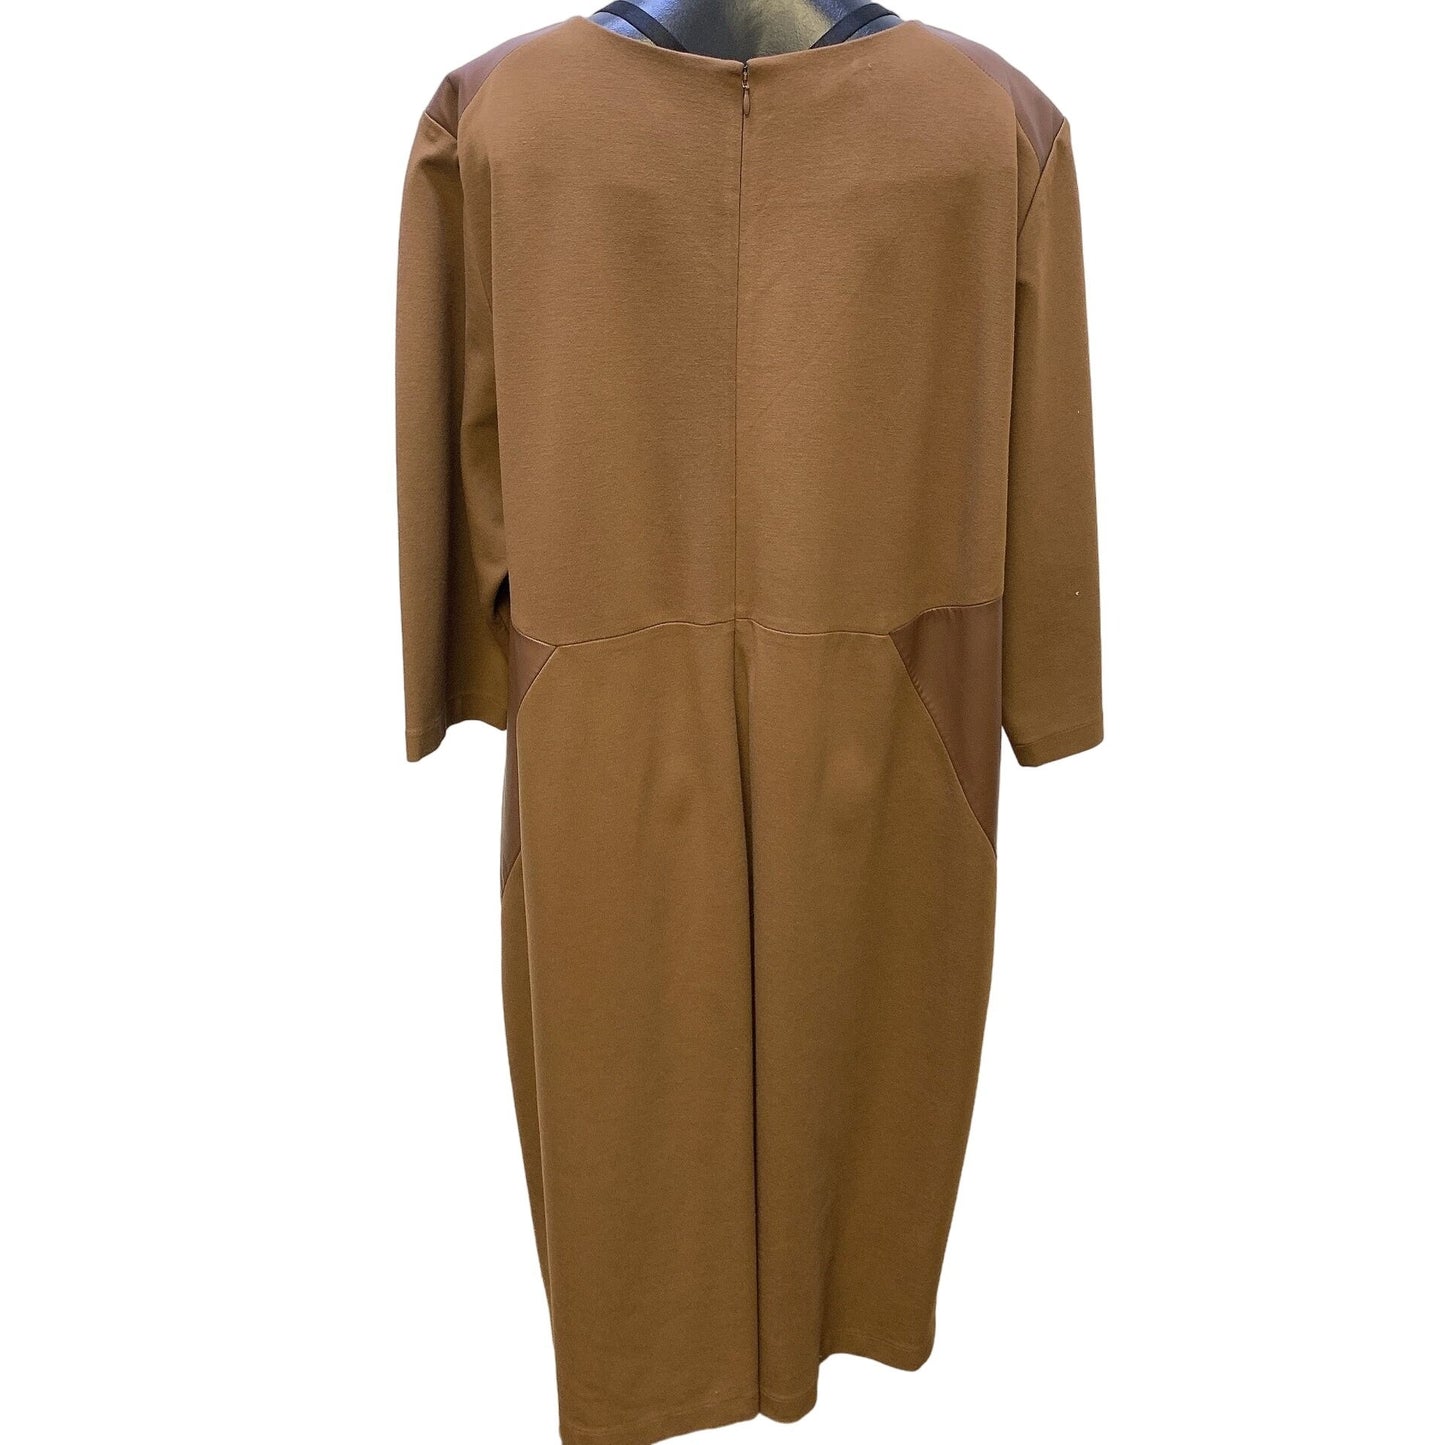 *Lafayette 148 Brown Leather Accent Dress Size 22W